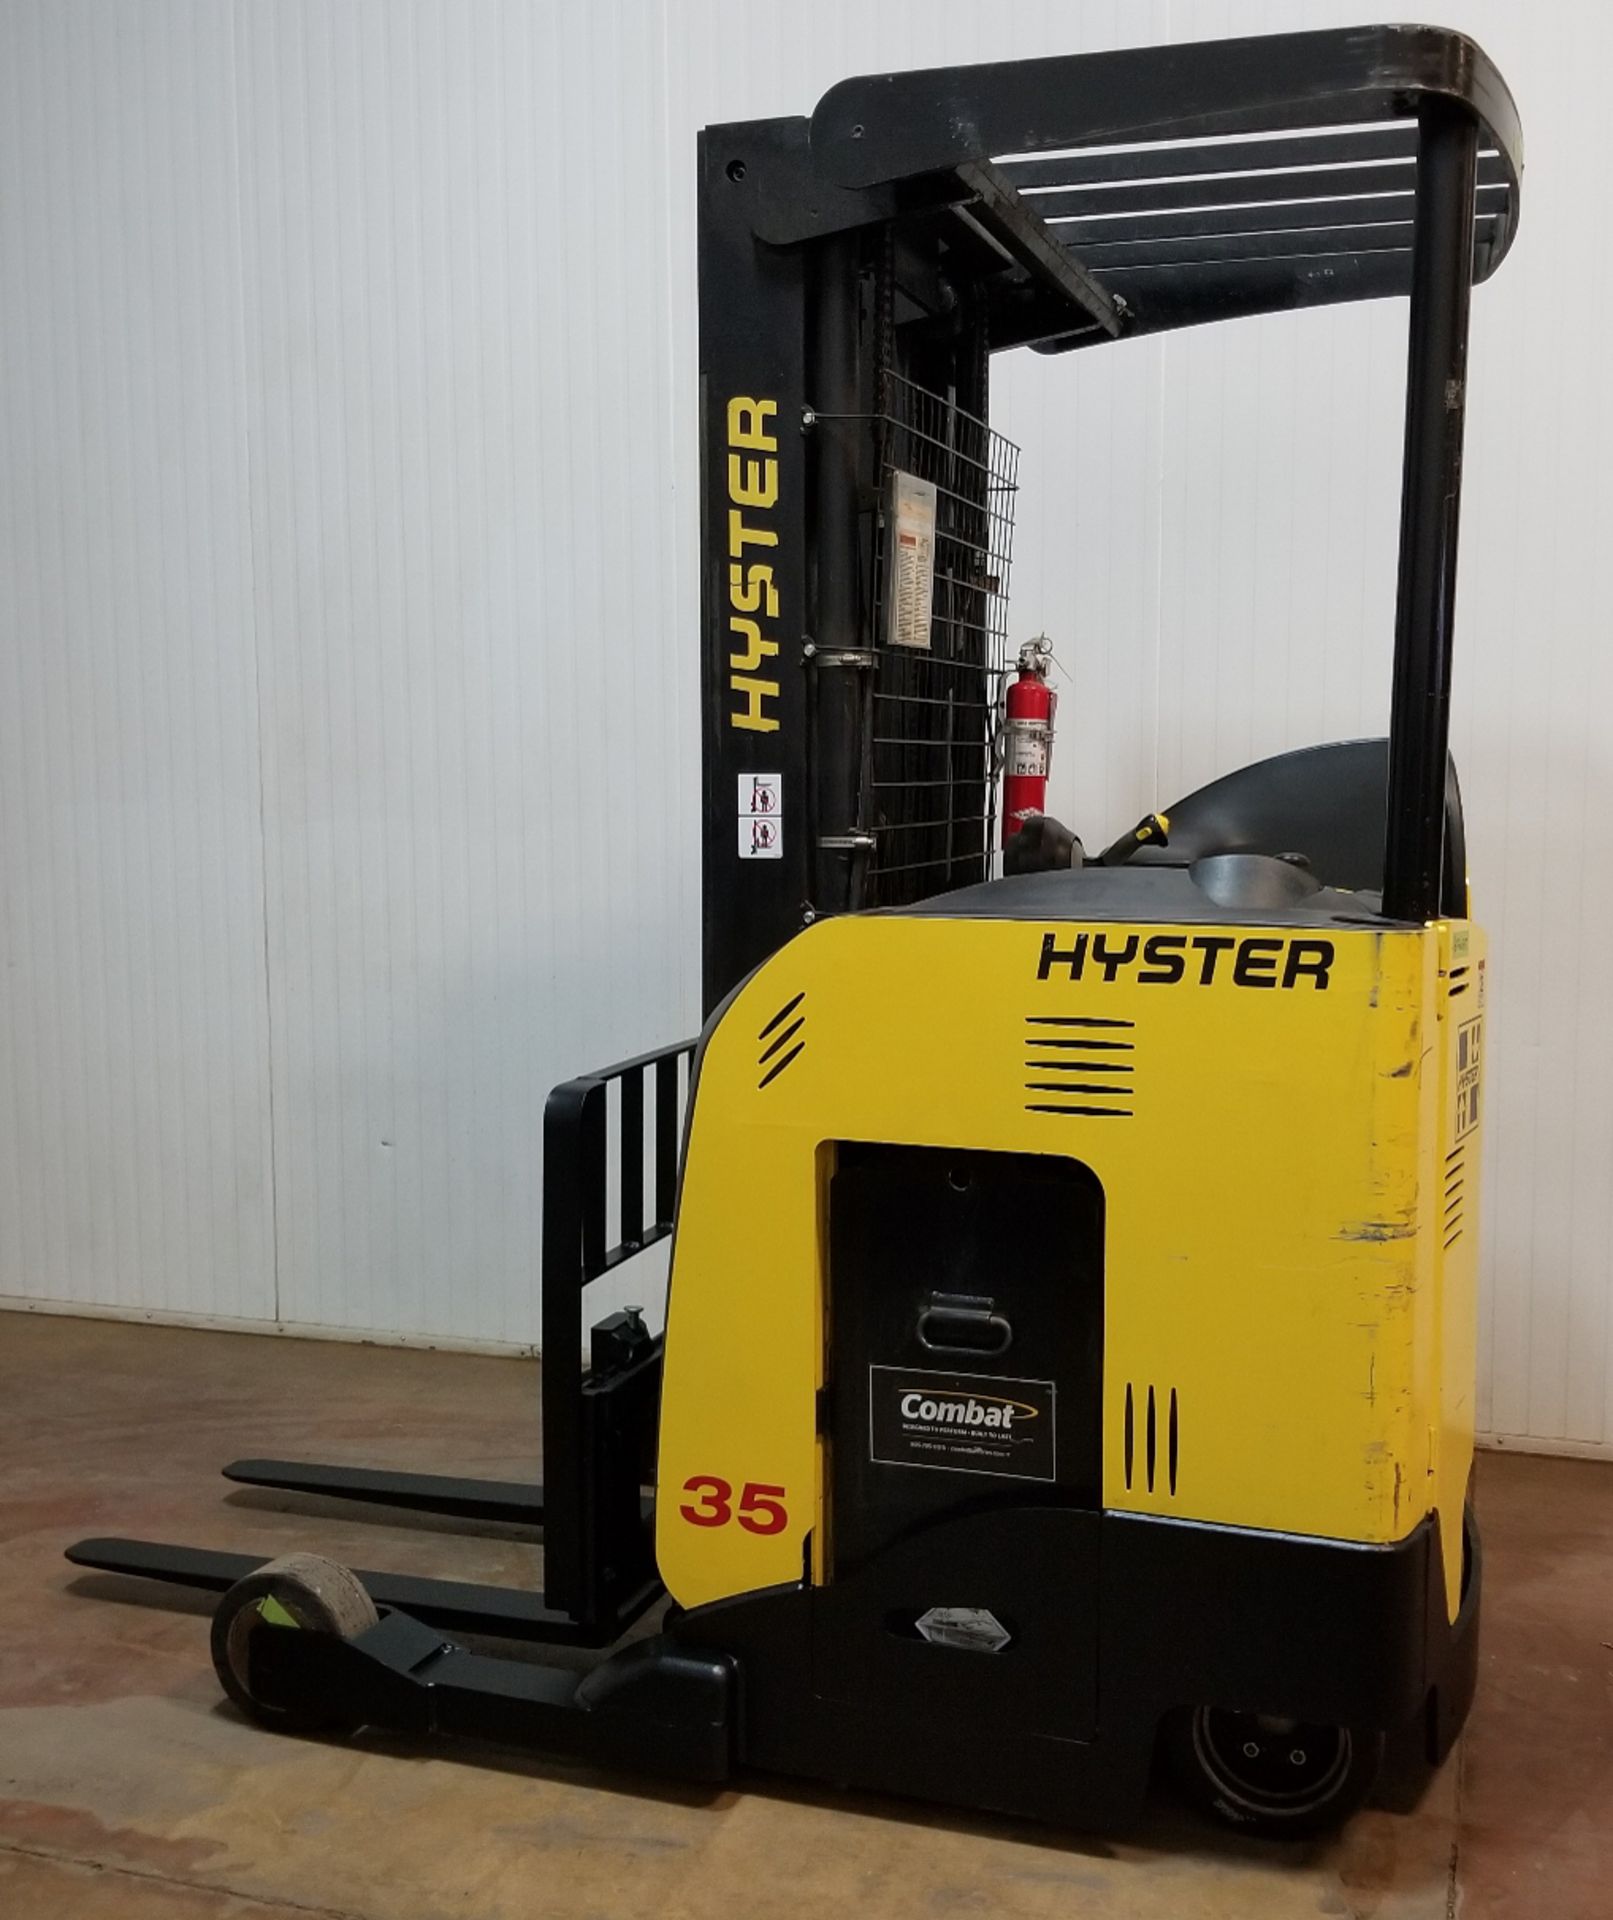 HYSTER (2015) N35ZRS2 3,500 LB. 36V ELECTRIC REACH TRUCK WITH 212" MAX. LIFT HEIGHT, 3-STAGE MAST, - Image 2 of 2